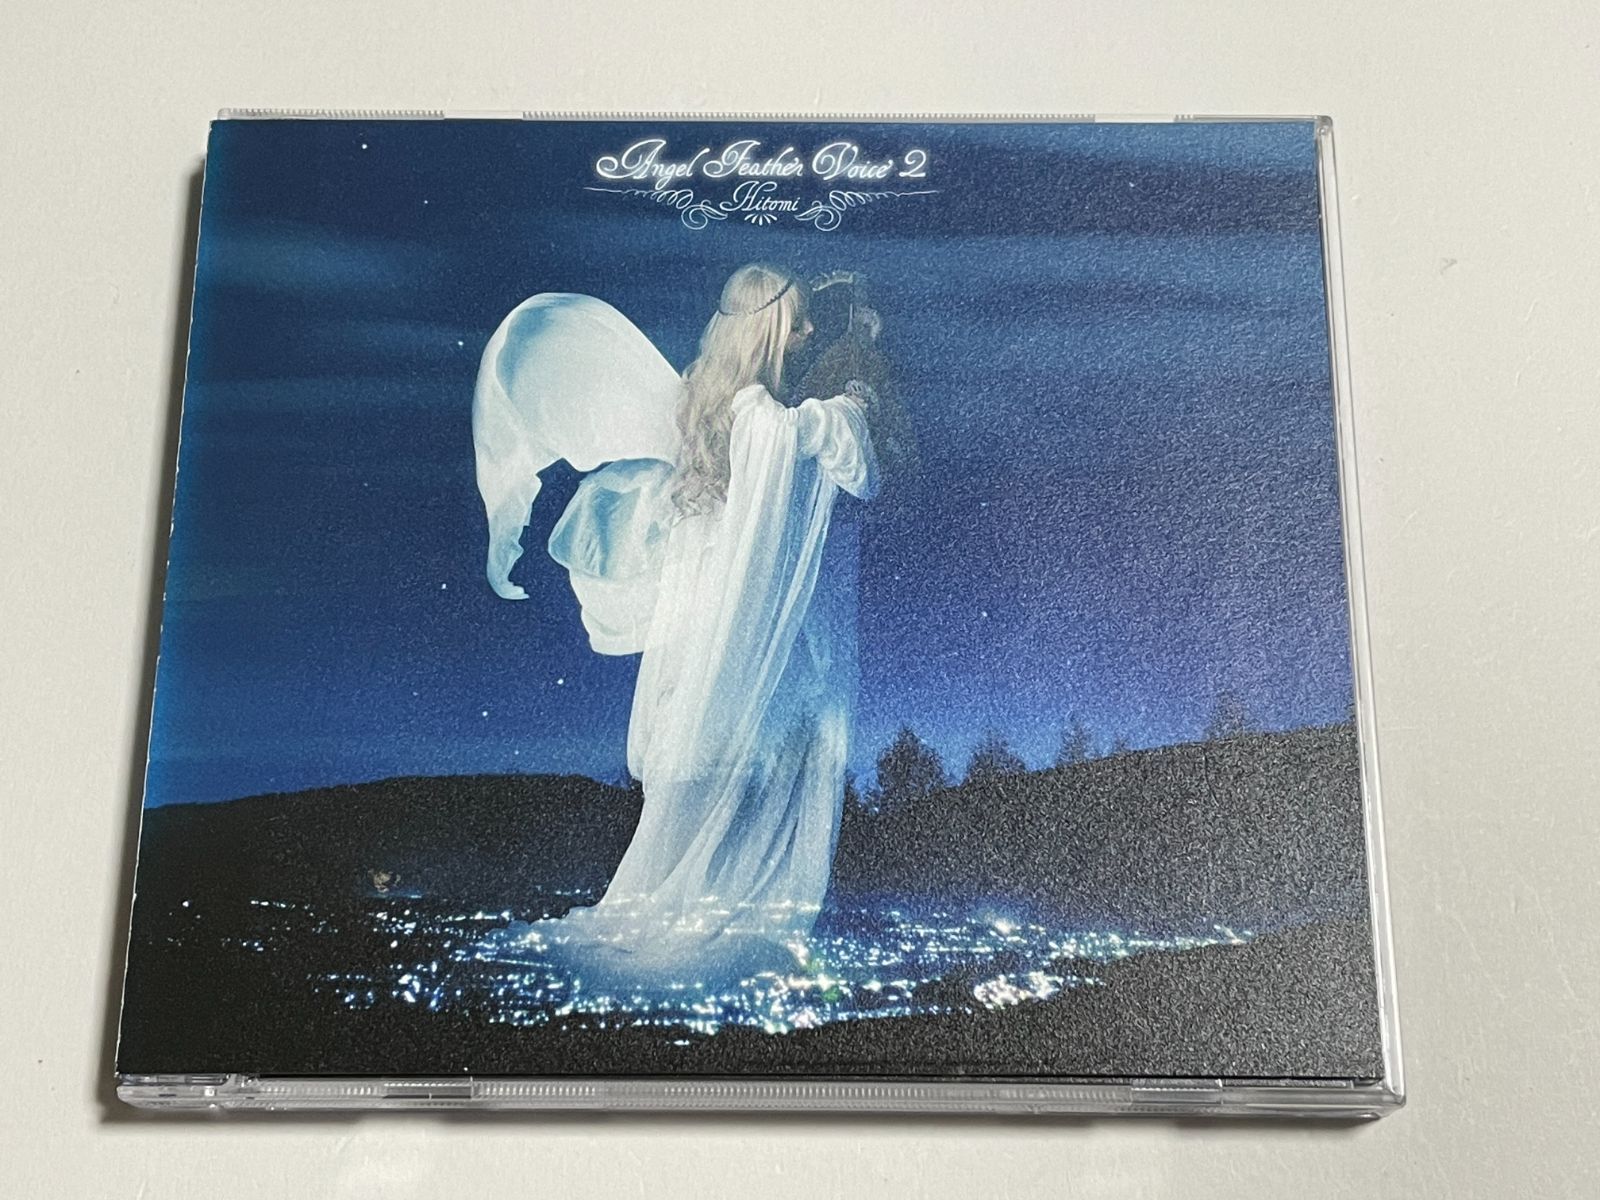 CD 黒石ひとみ Hitomi『Angel Feather Voice 2』